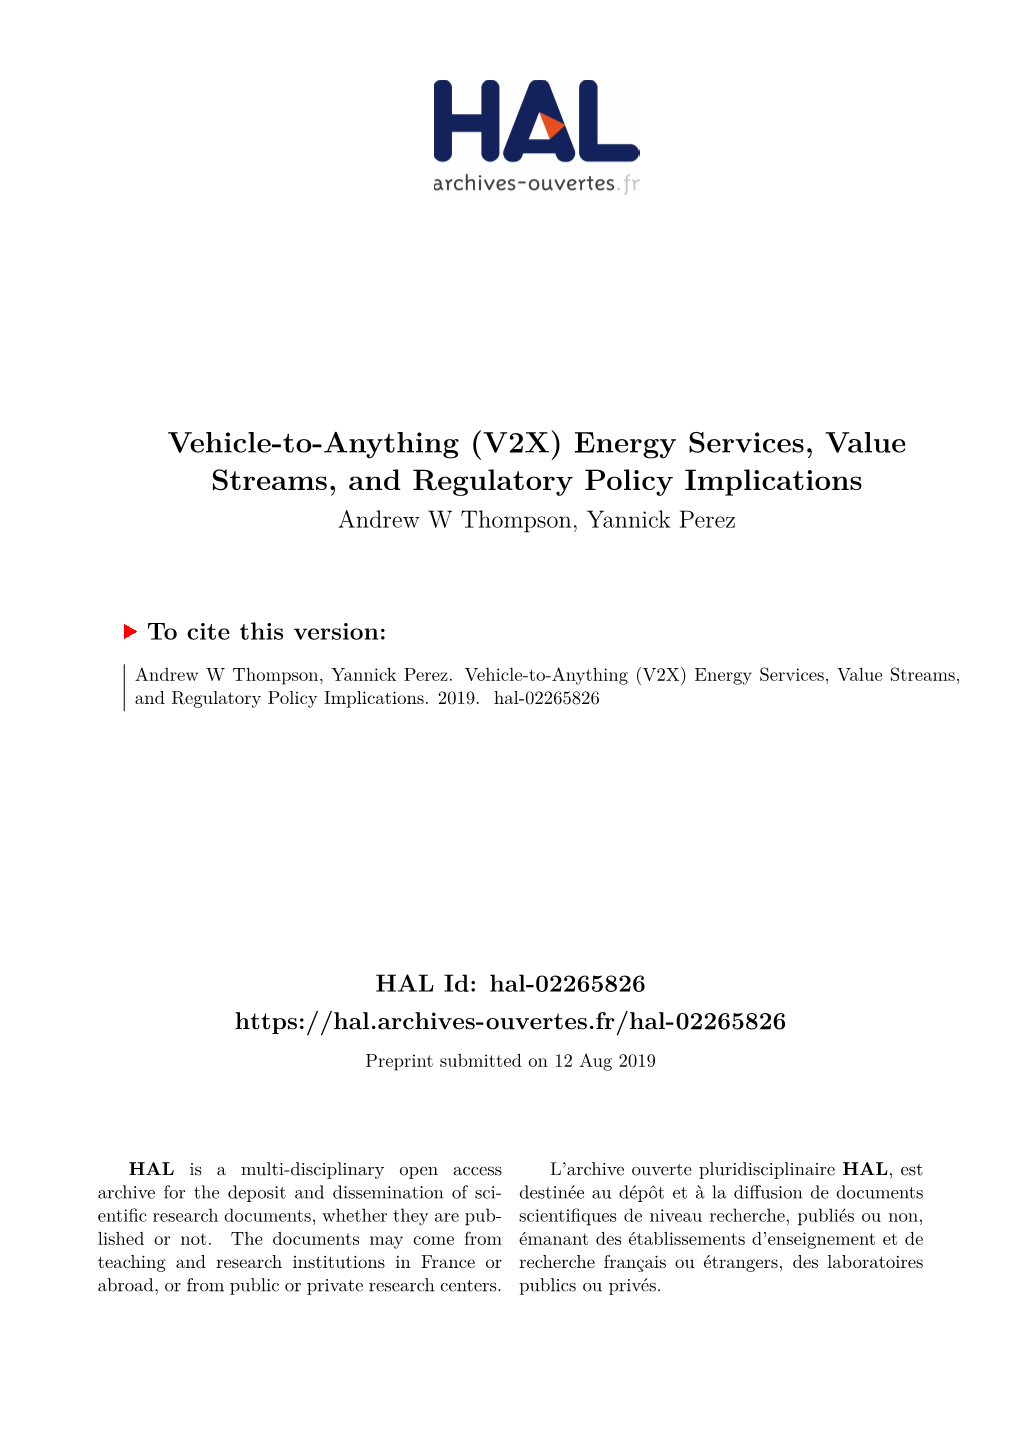 Vehicle-To-Anything (V2X) Energy Services, Value Streams, and Regulatory Policy Implications Andrew W Thompson, Yannick Perez